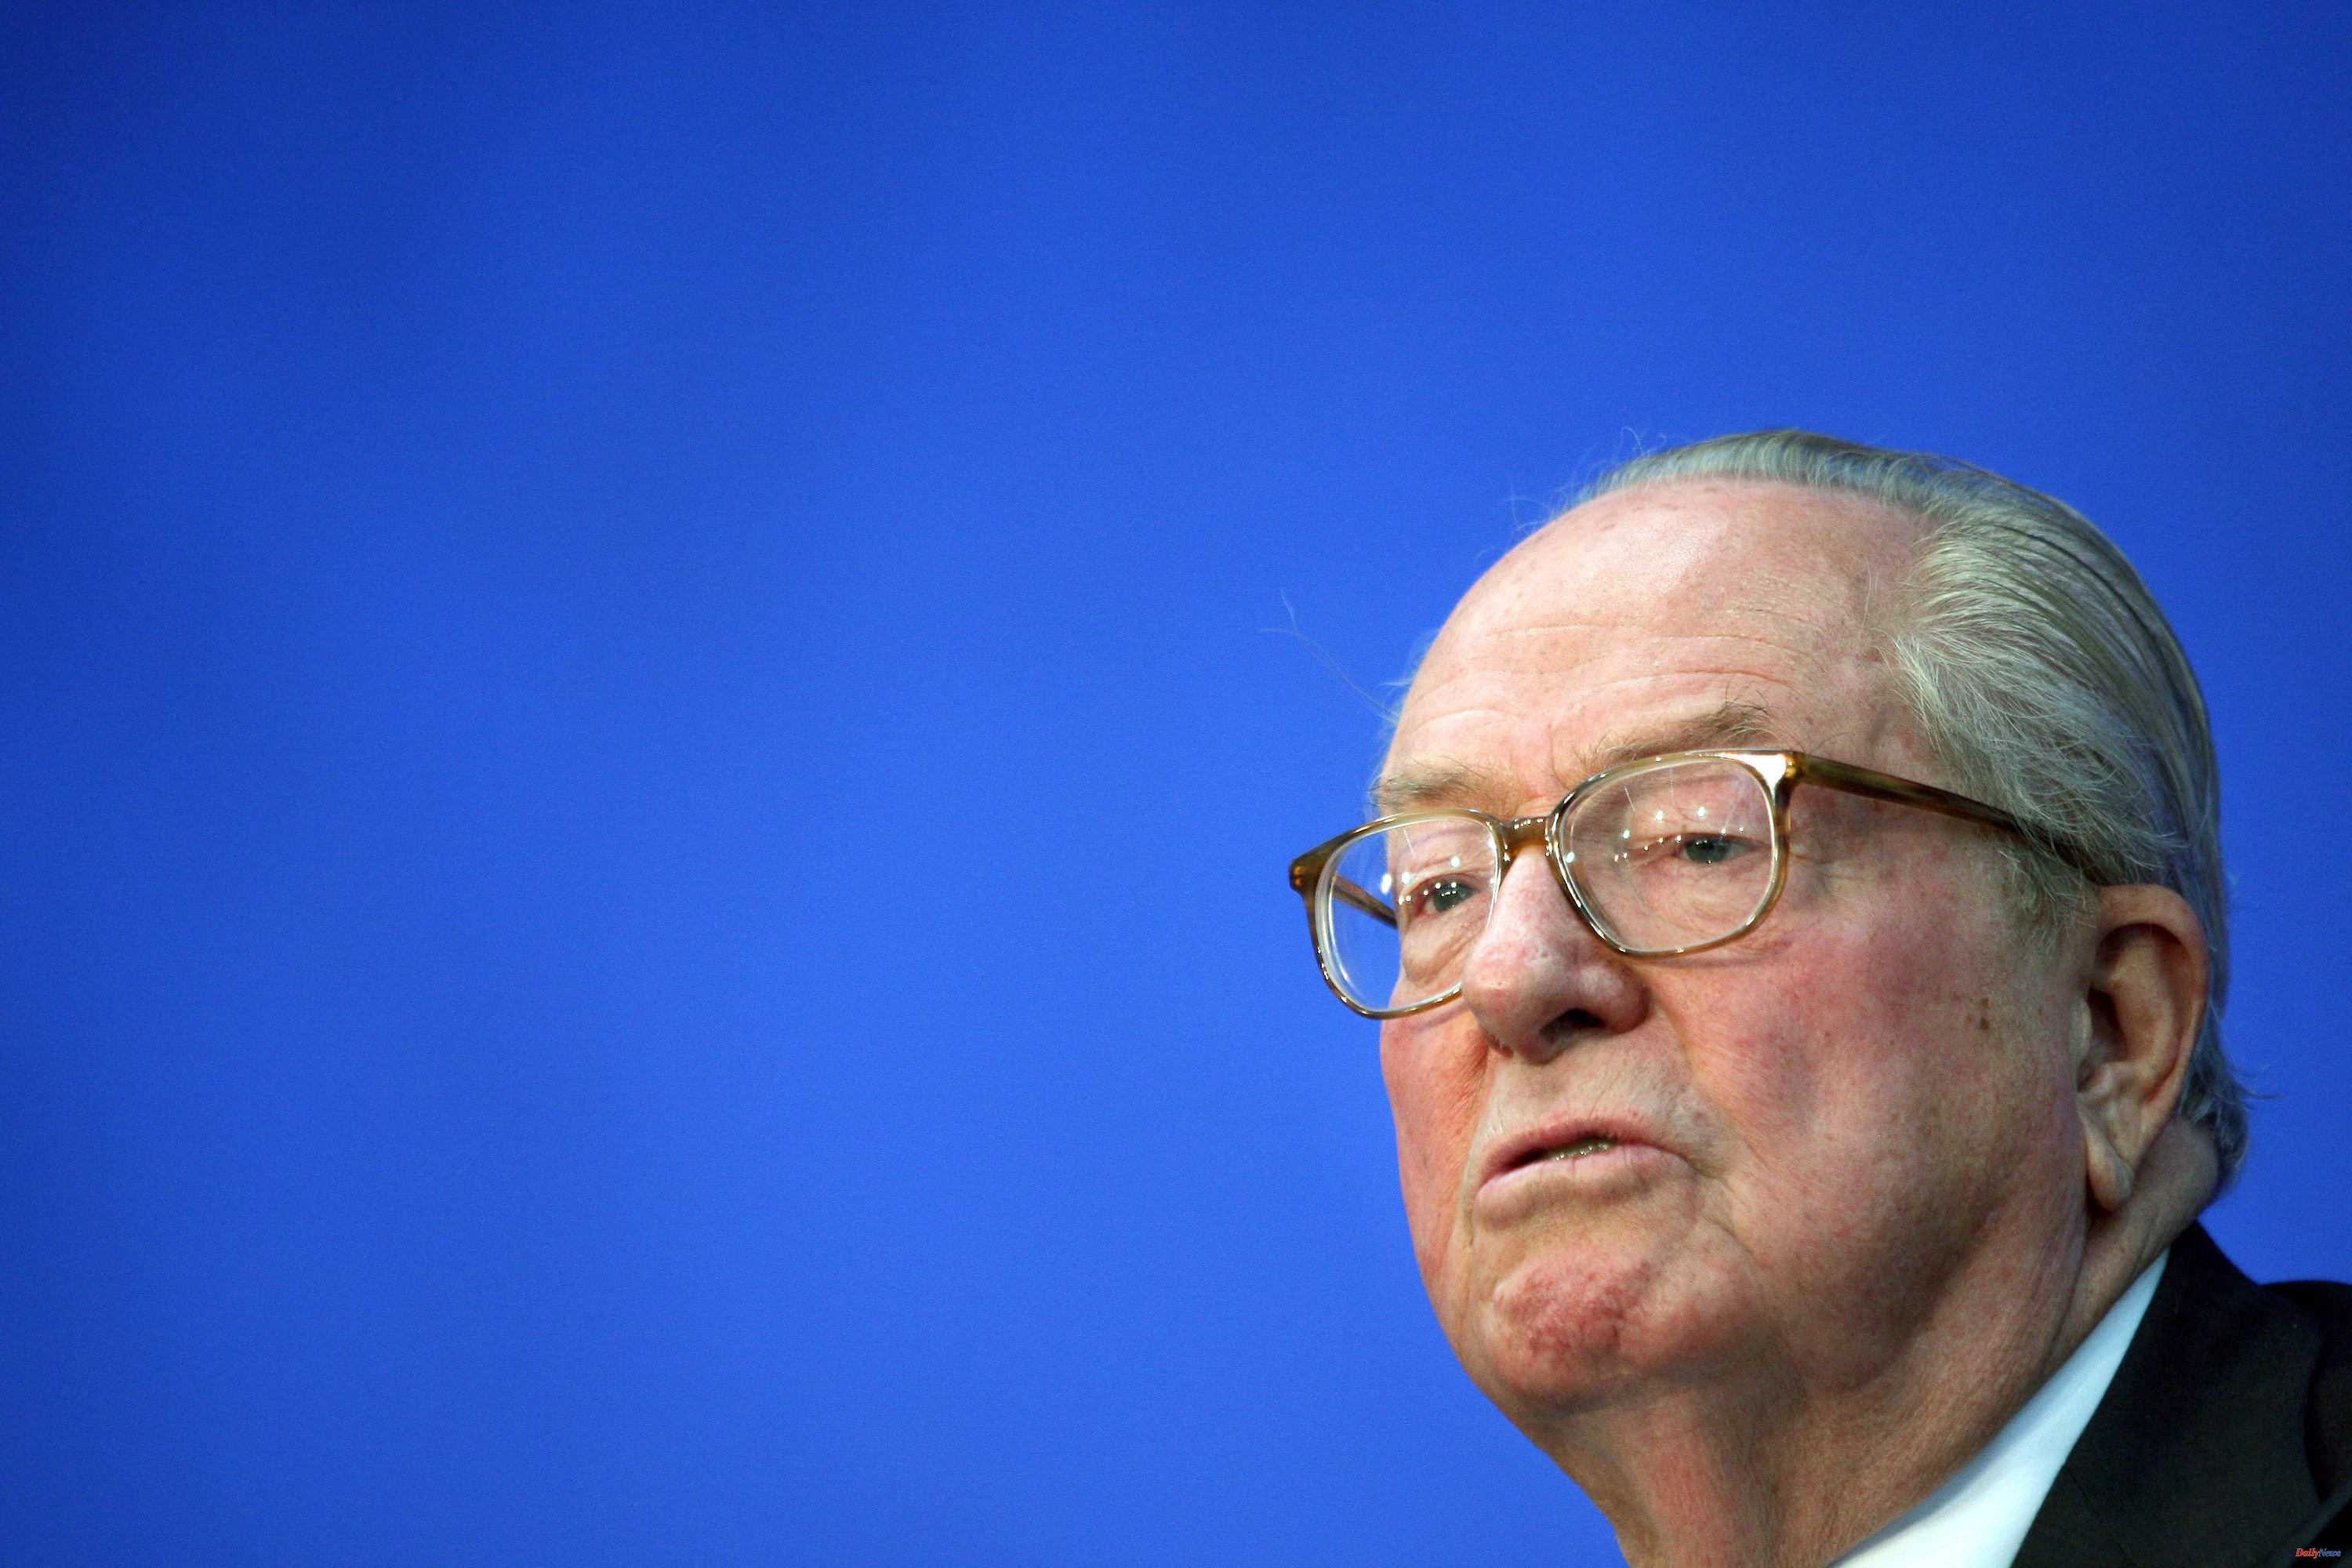 France French far-right party founder Jean-Marie Le Pen hospitalized after suffering a heart attack